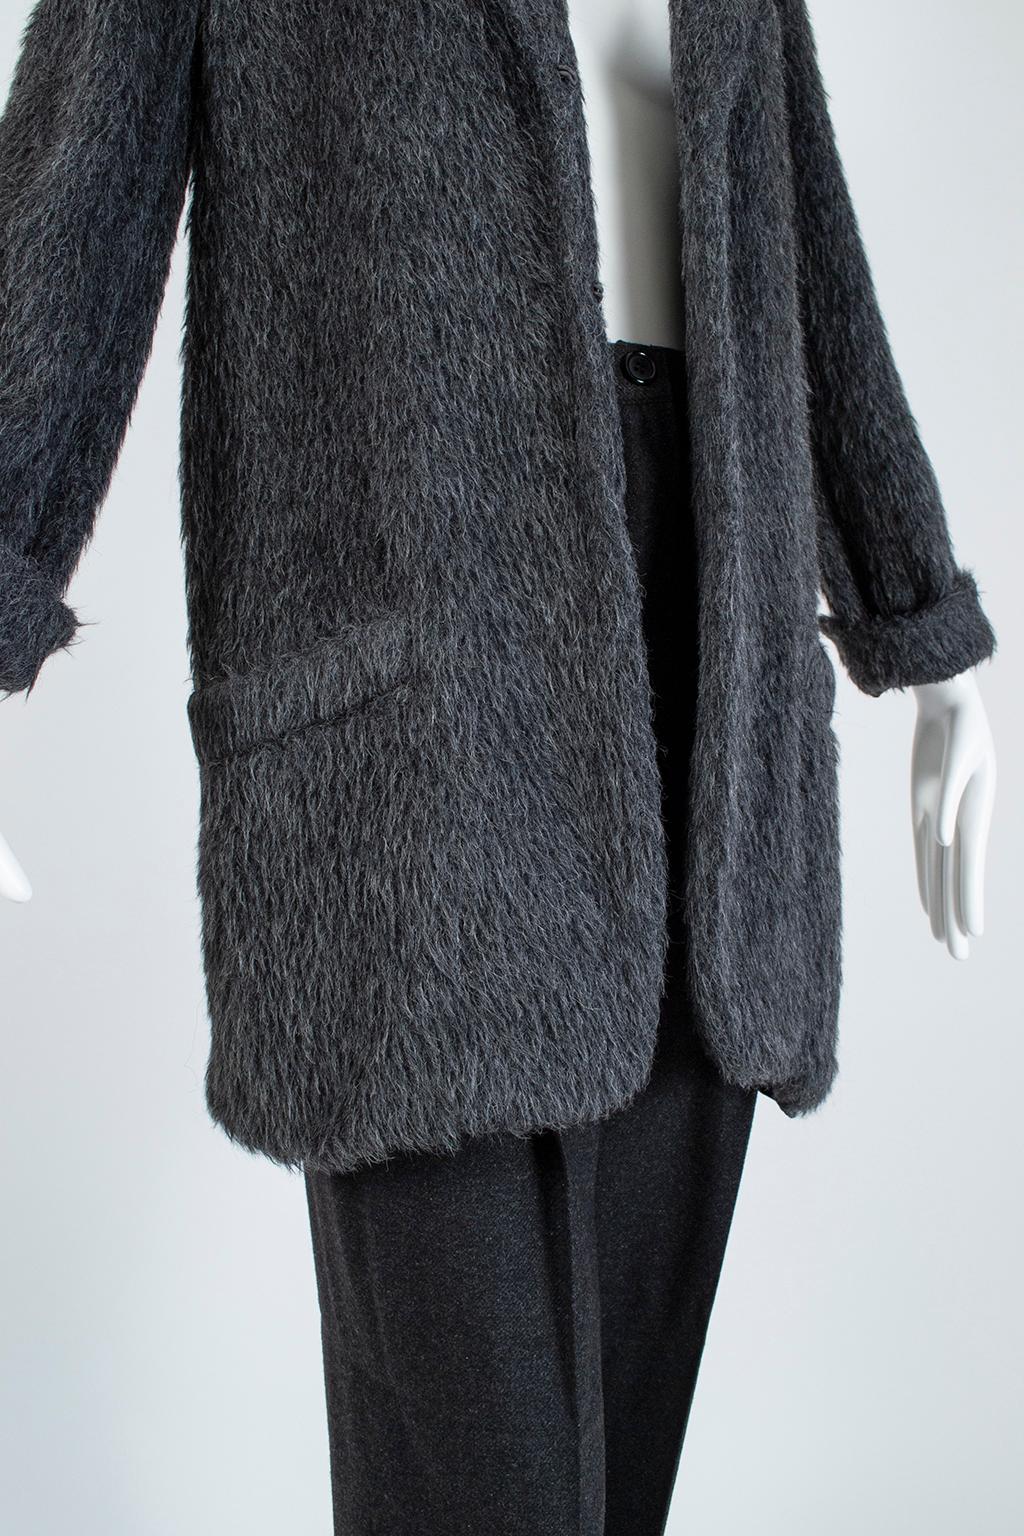 Donna Karan Charcoal Gray Teddy Bear Cashmere and Alpaca Pant Suit - M, 1990s In Excellent Condition For Sale In Tucson, AZ